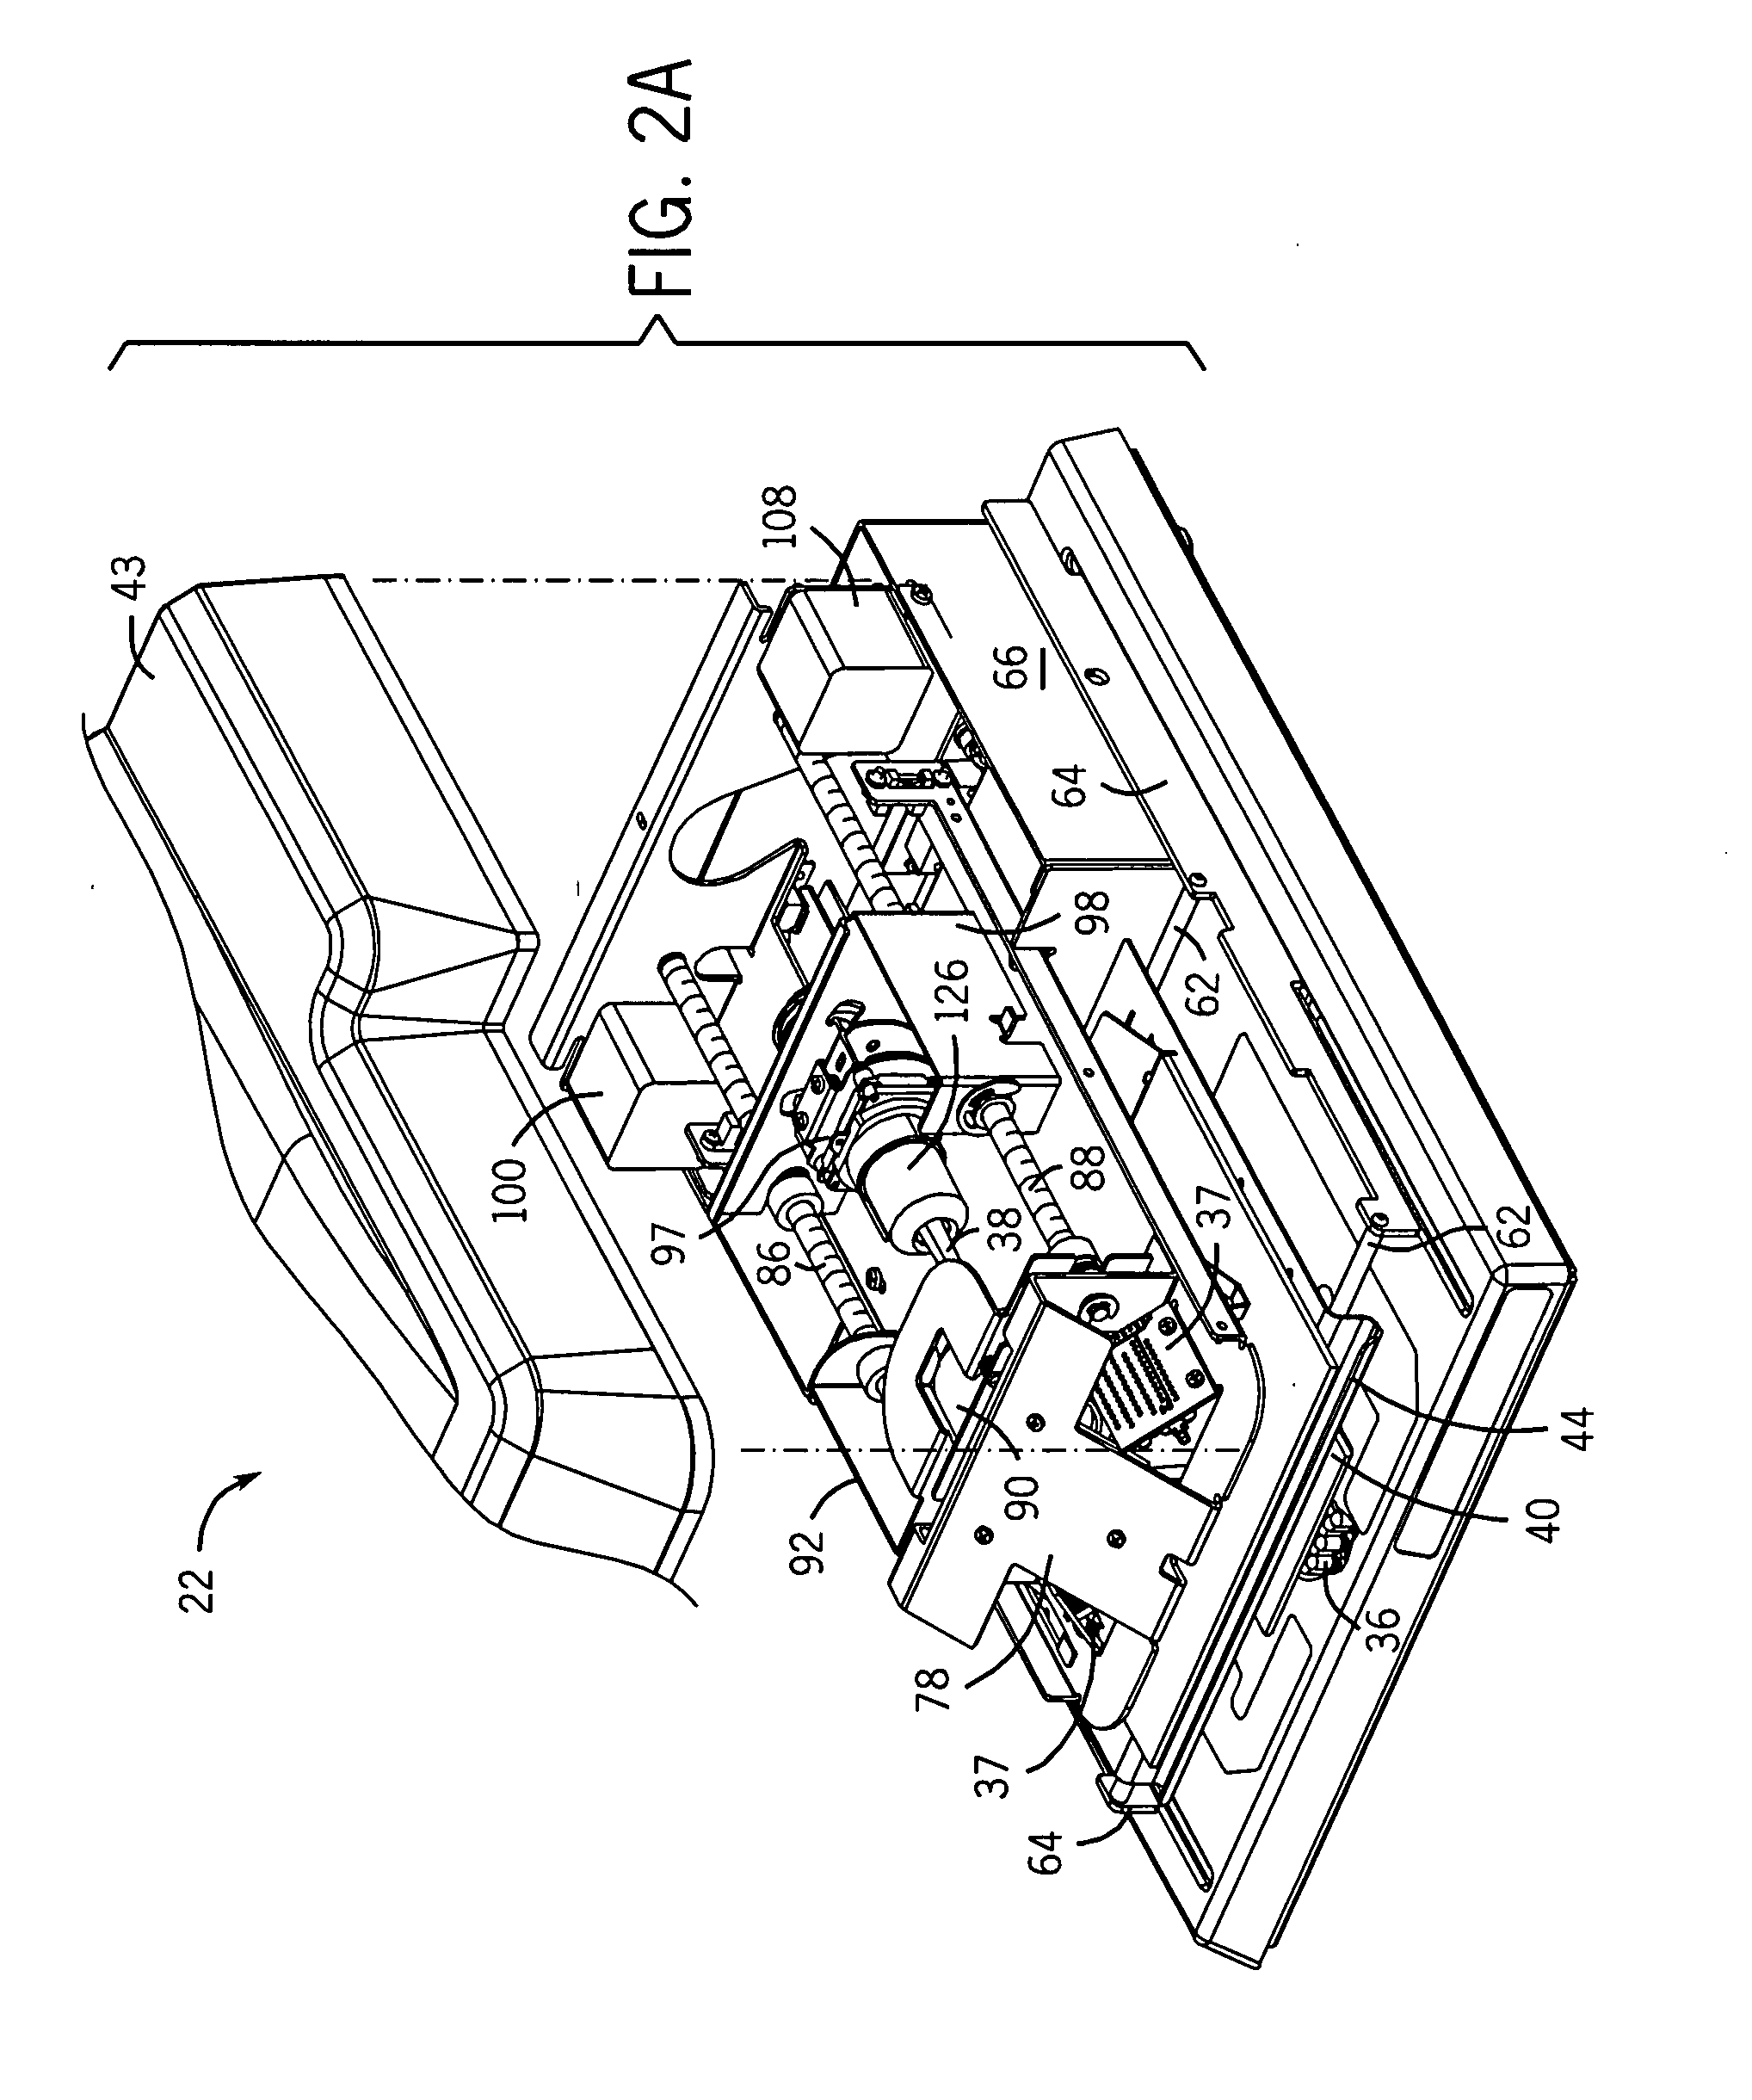 Computer User Interface for a Digital Microform Imaging Apparatus